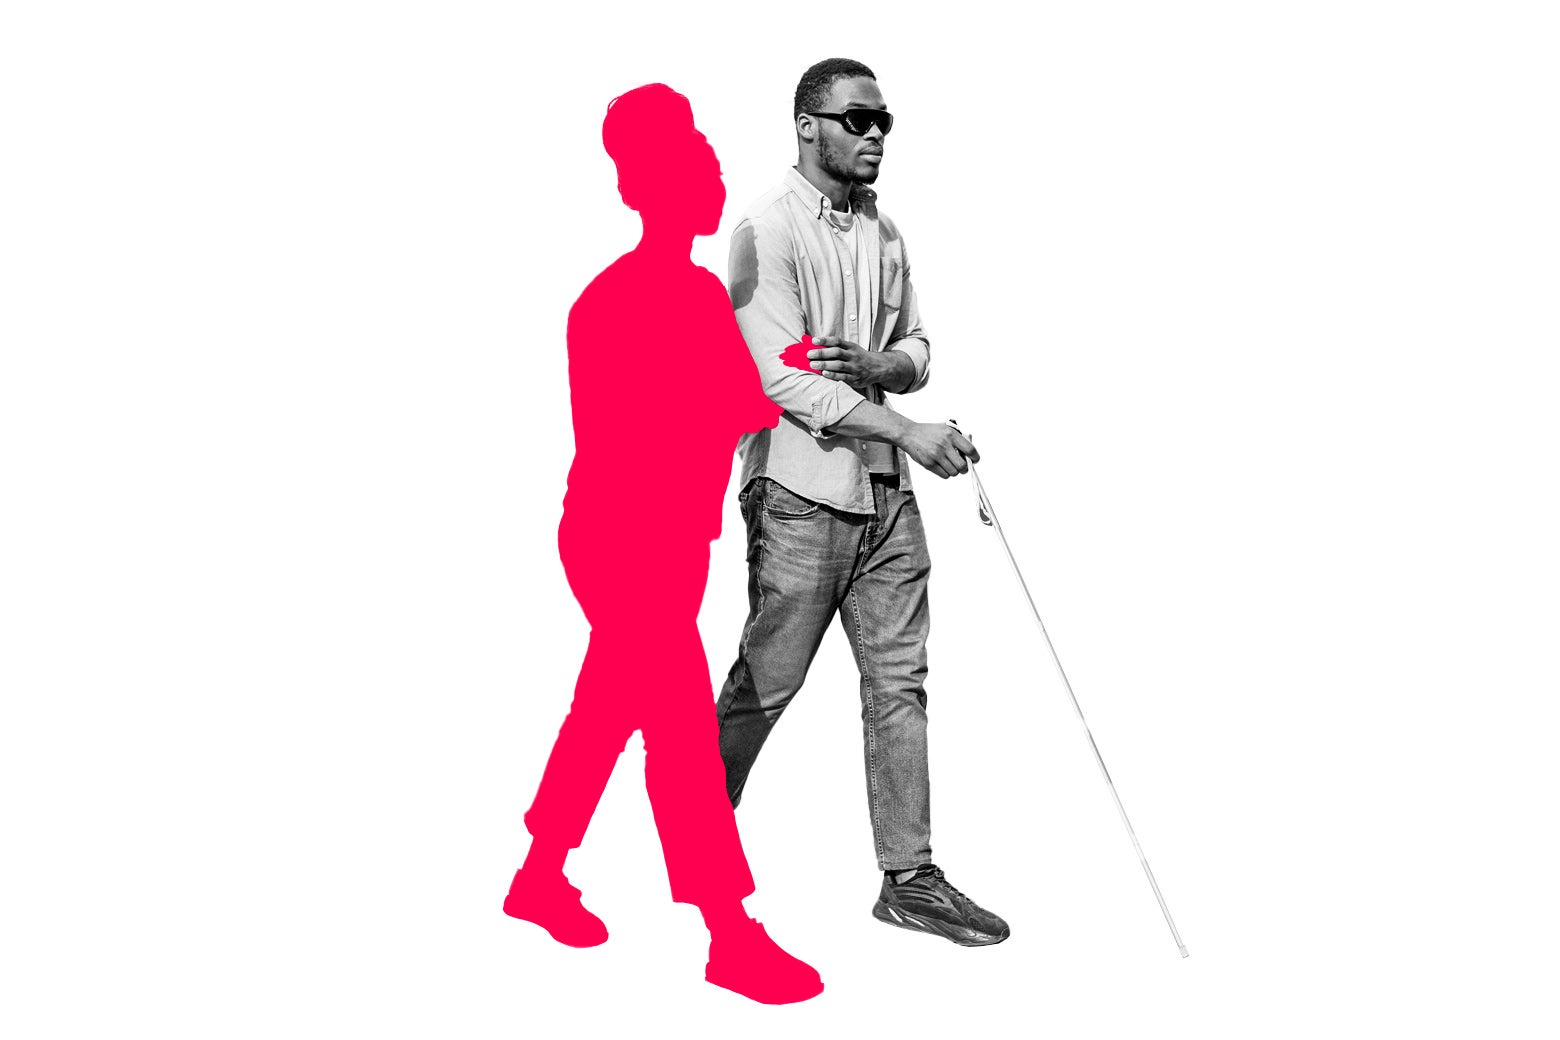 Blind man walking with a woman holding his arm.